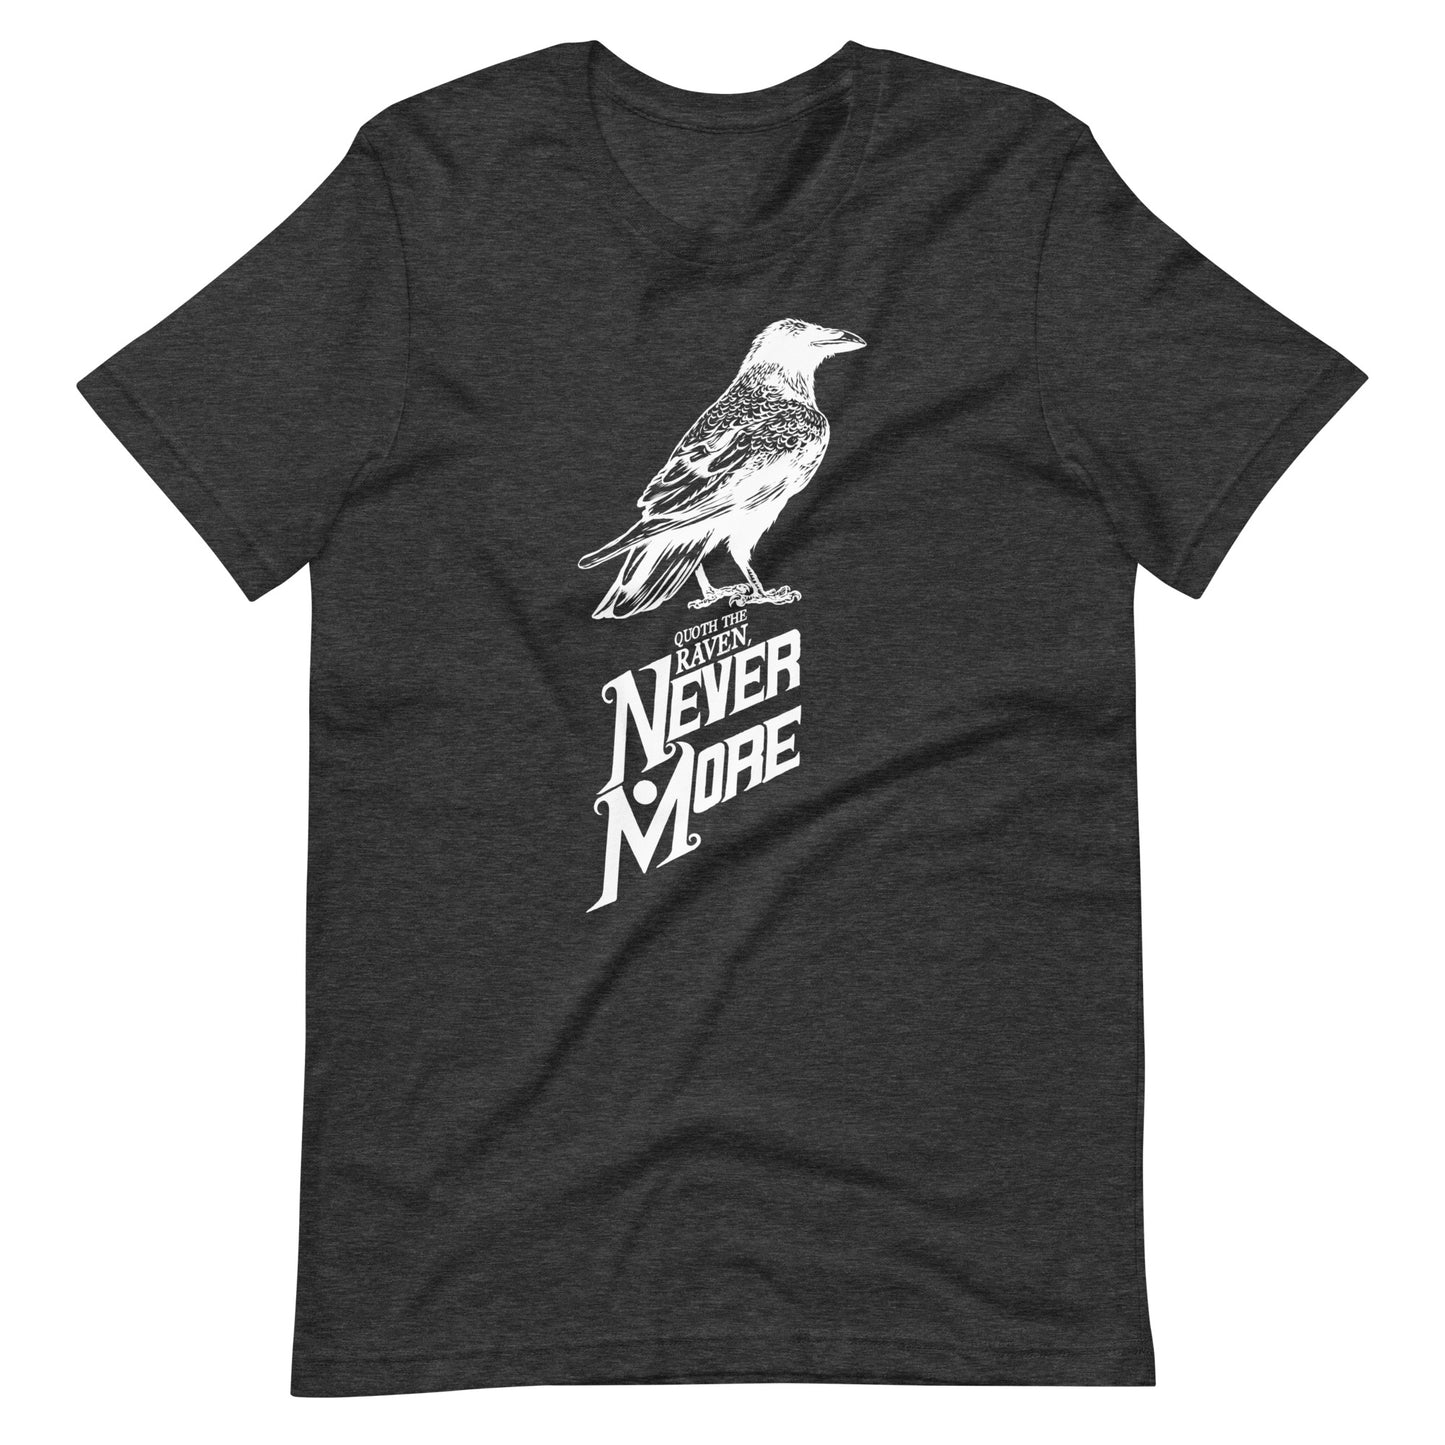 Quoth the Raven Nevermore - Men's t-shirt - Dark Grey Heather Front